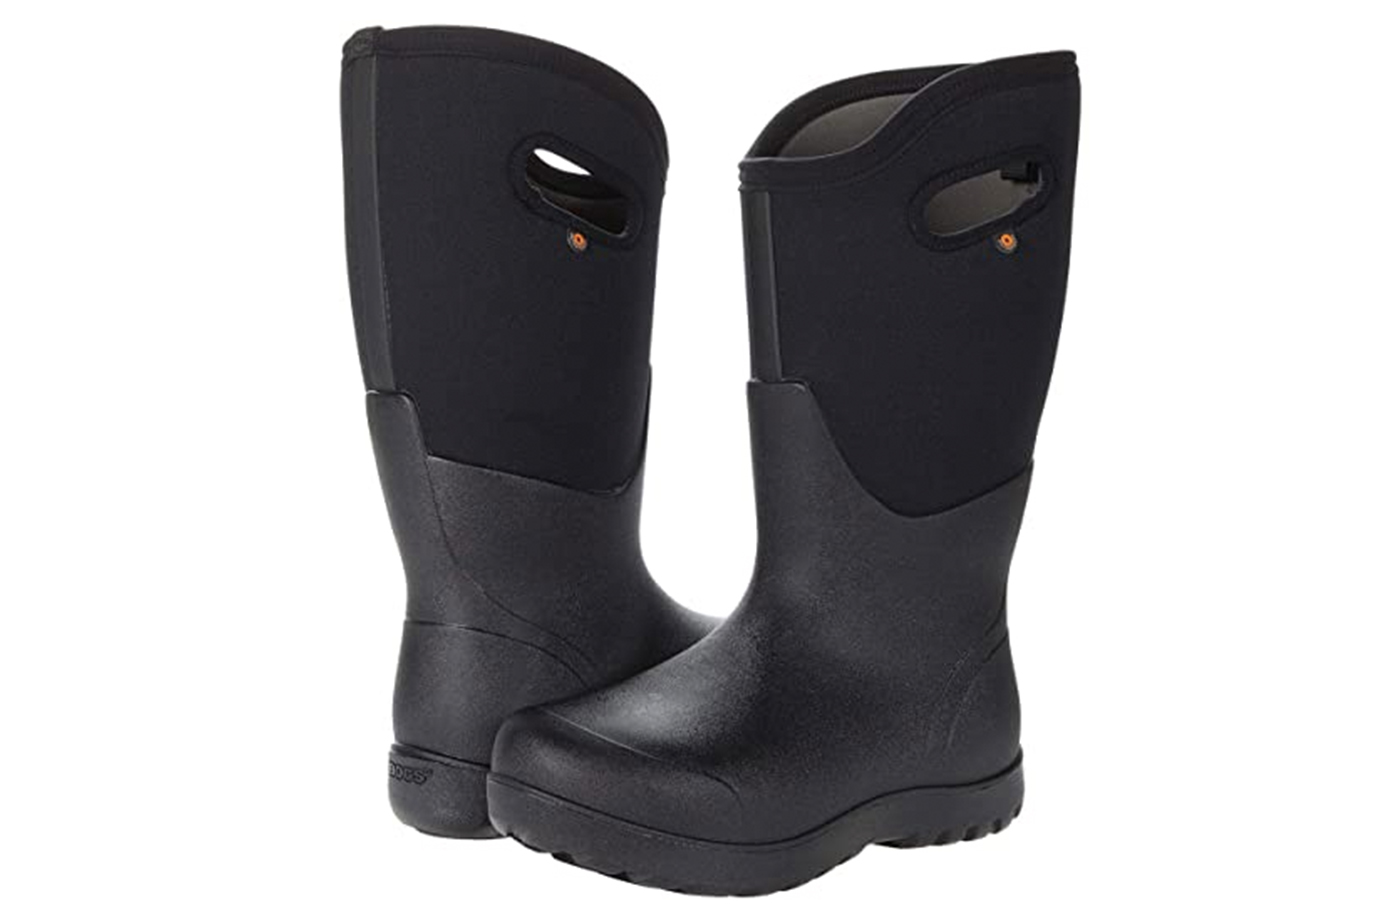 The Best Rain Boots for Women 